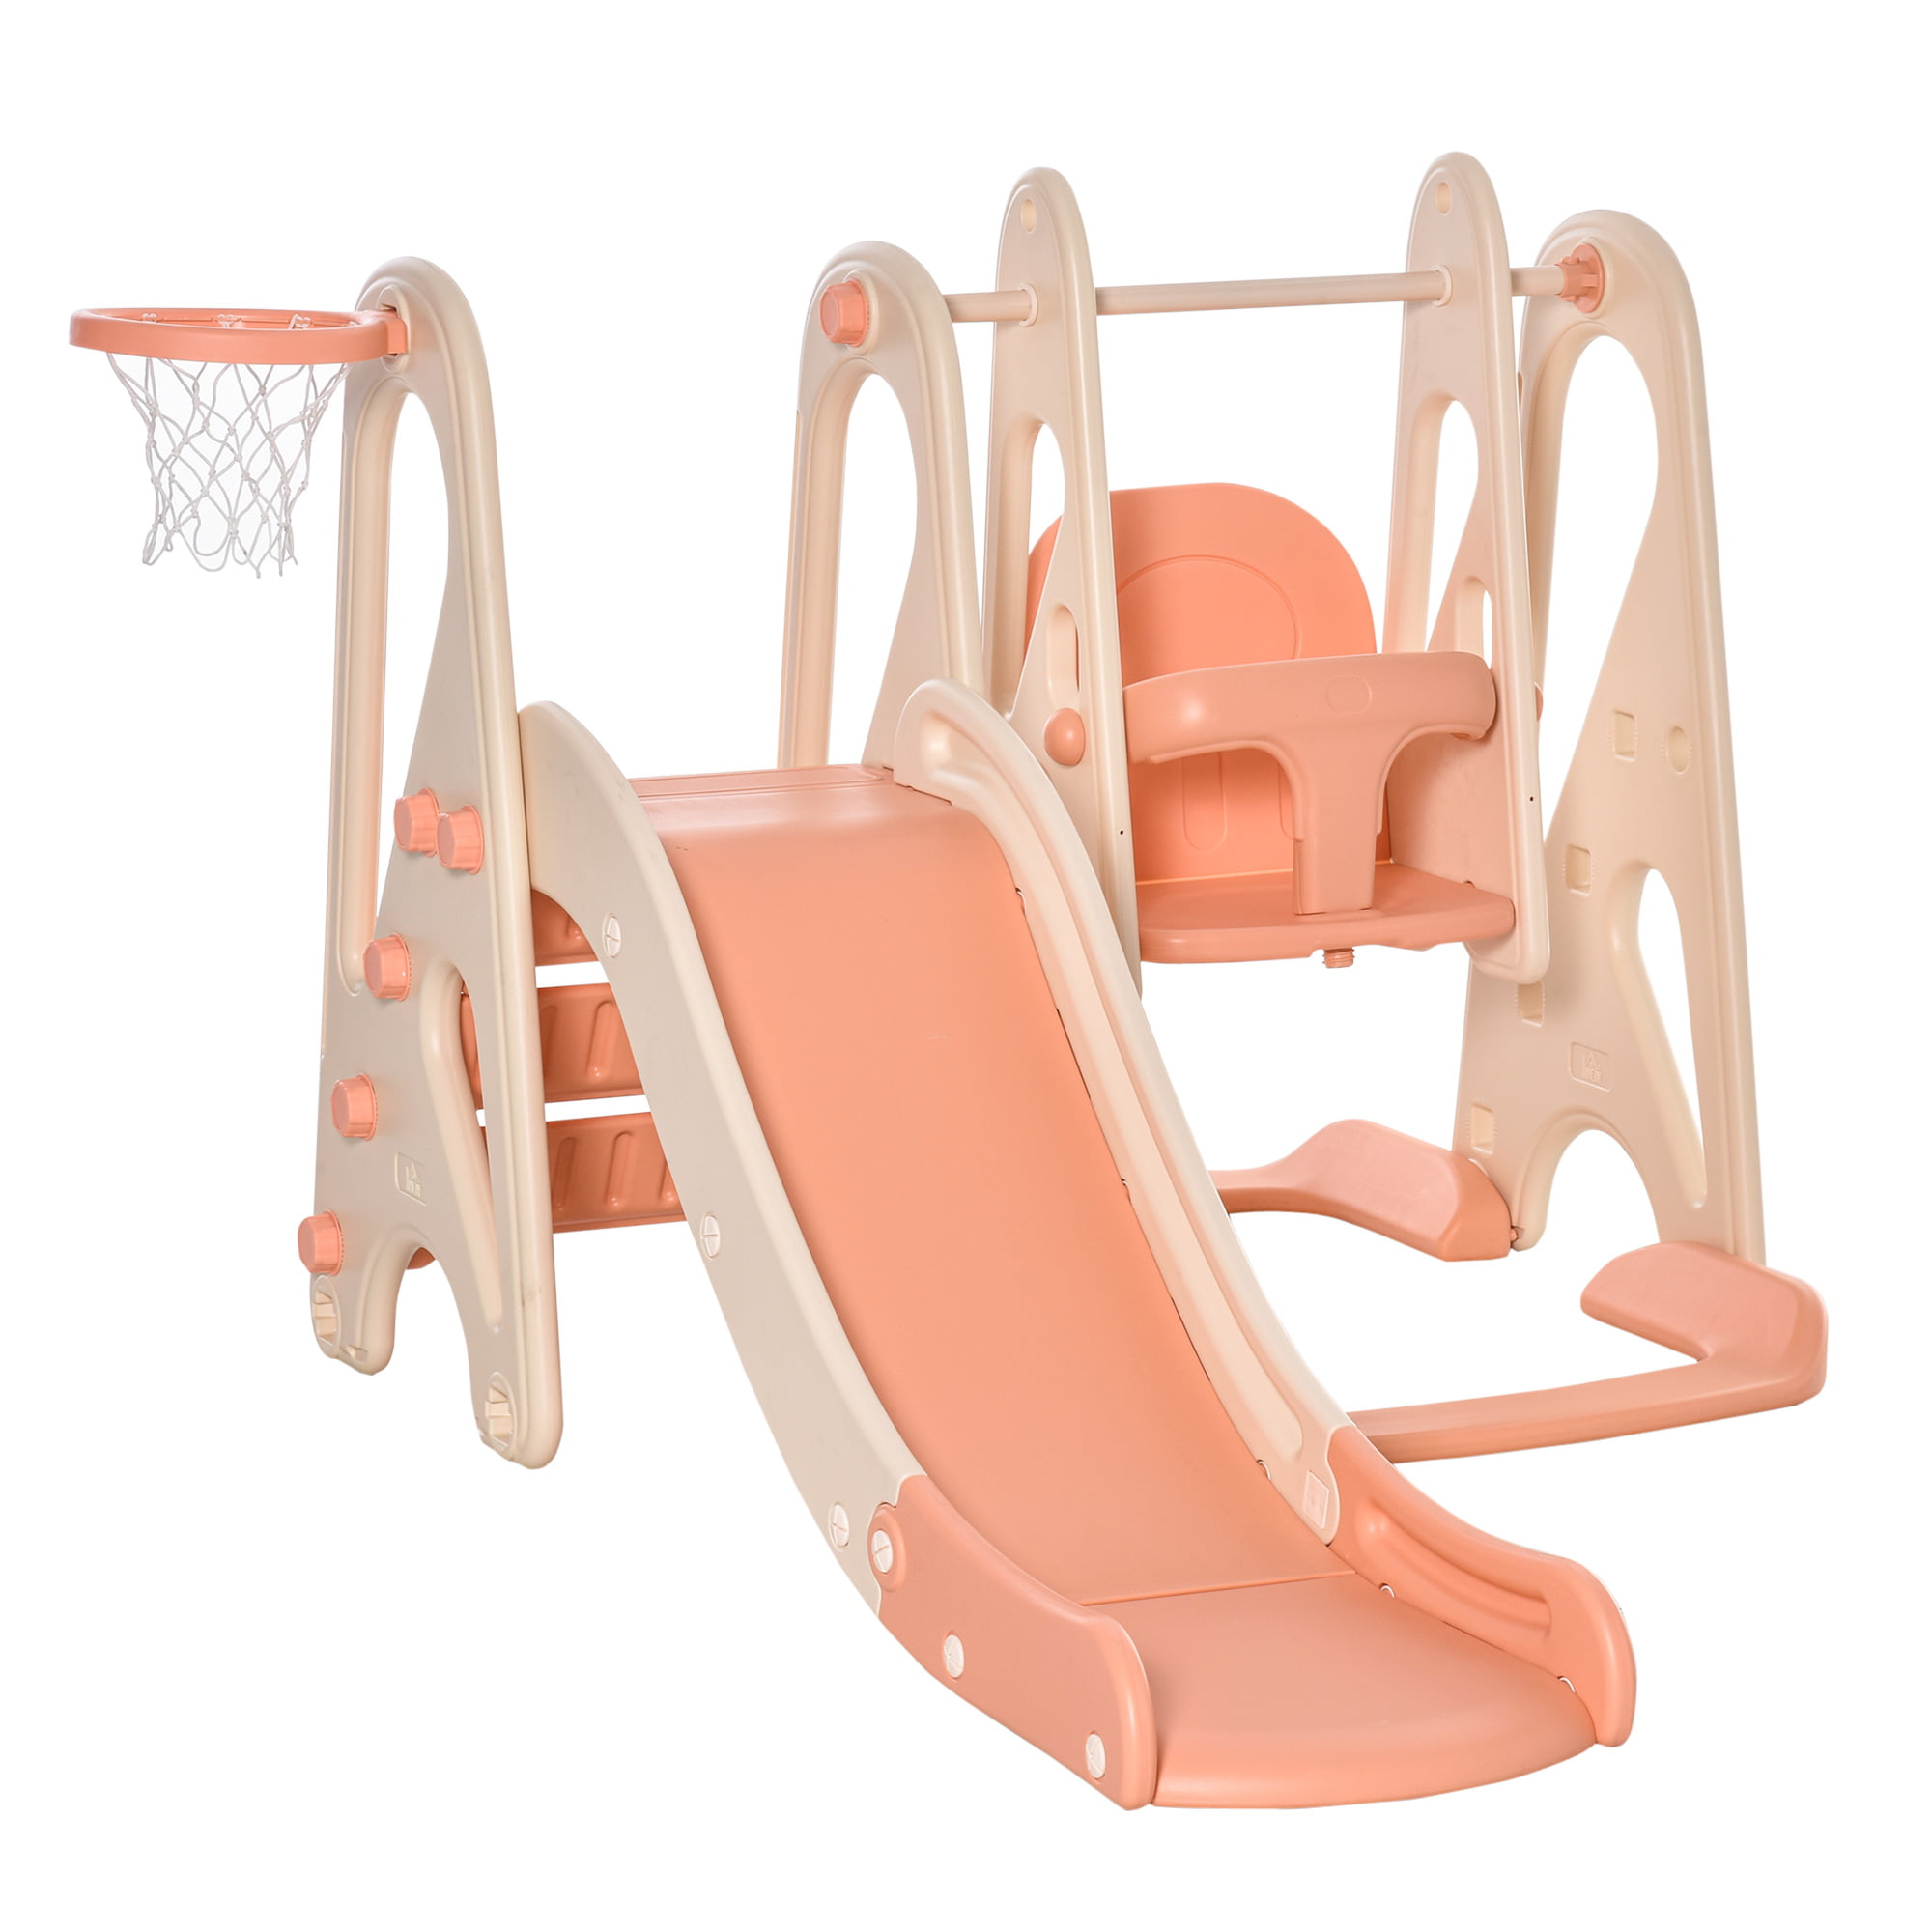 Toddler Climber and Swing Set from US, Pink 3 in 1 Kids Play Climber Slide Playset Indoor Outdoor Playground Toy with Basketball Hoops Activity Center in Backyard 